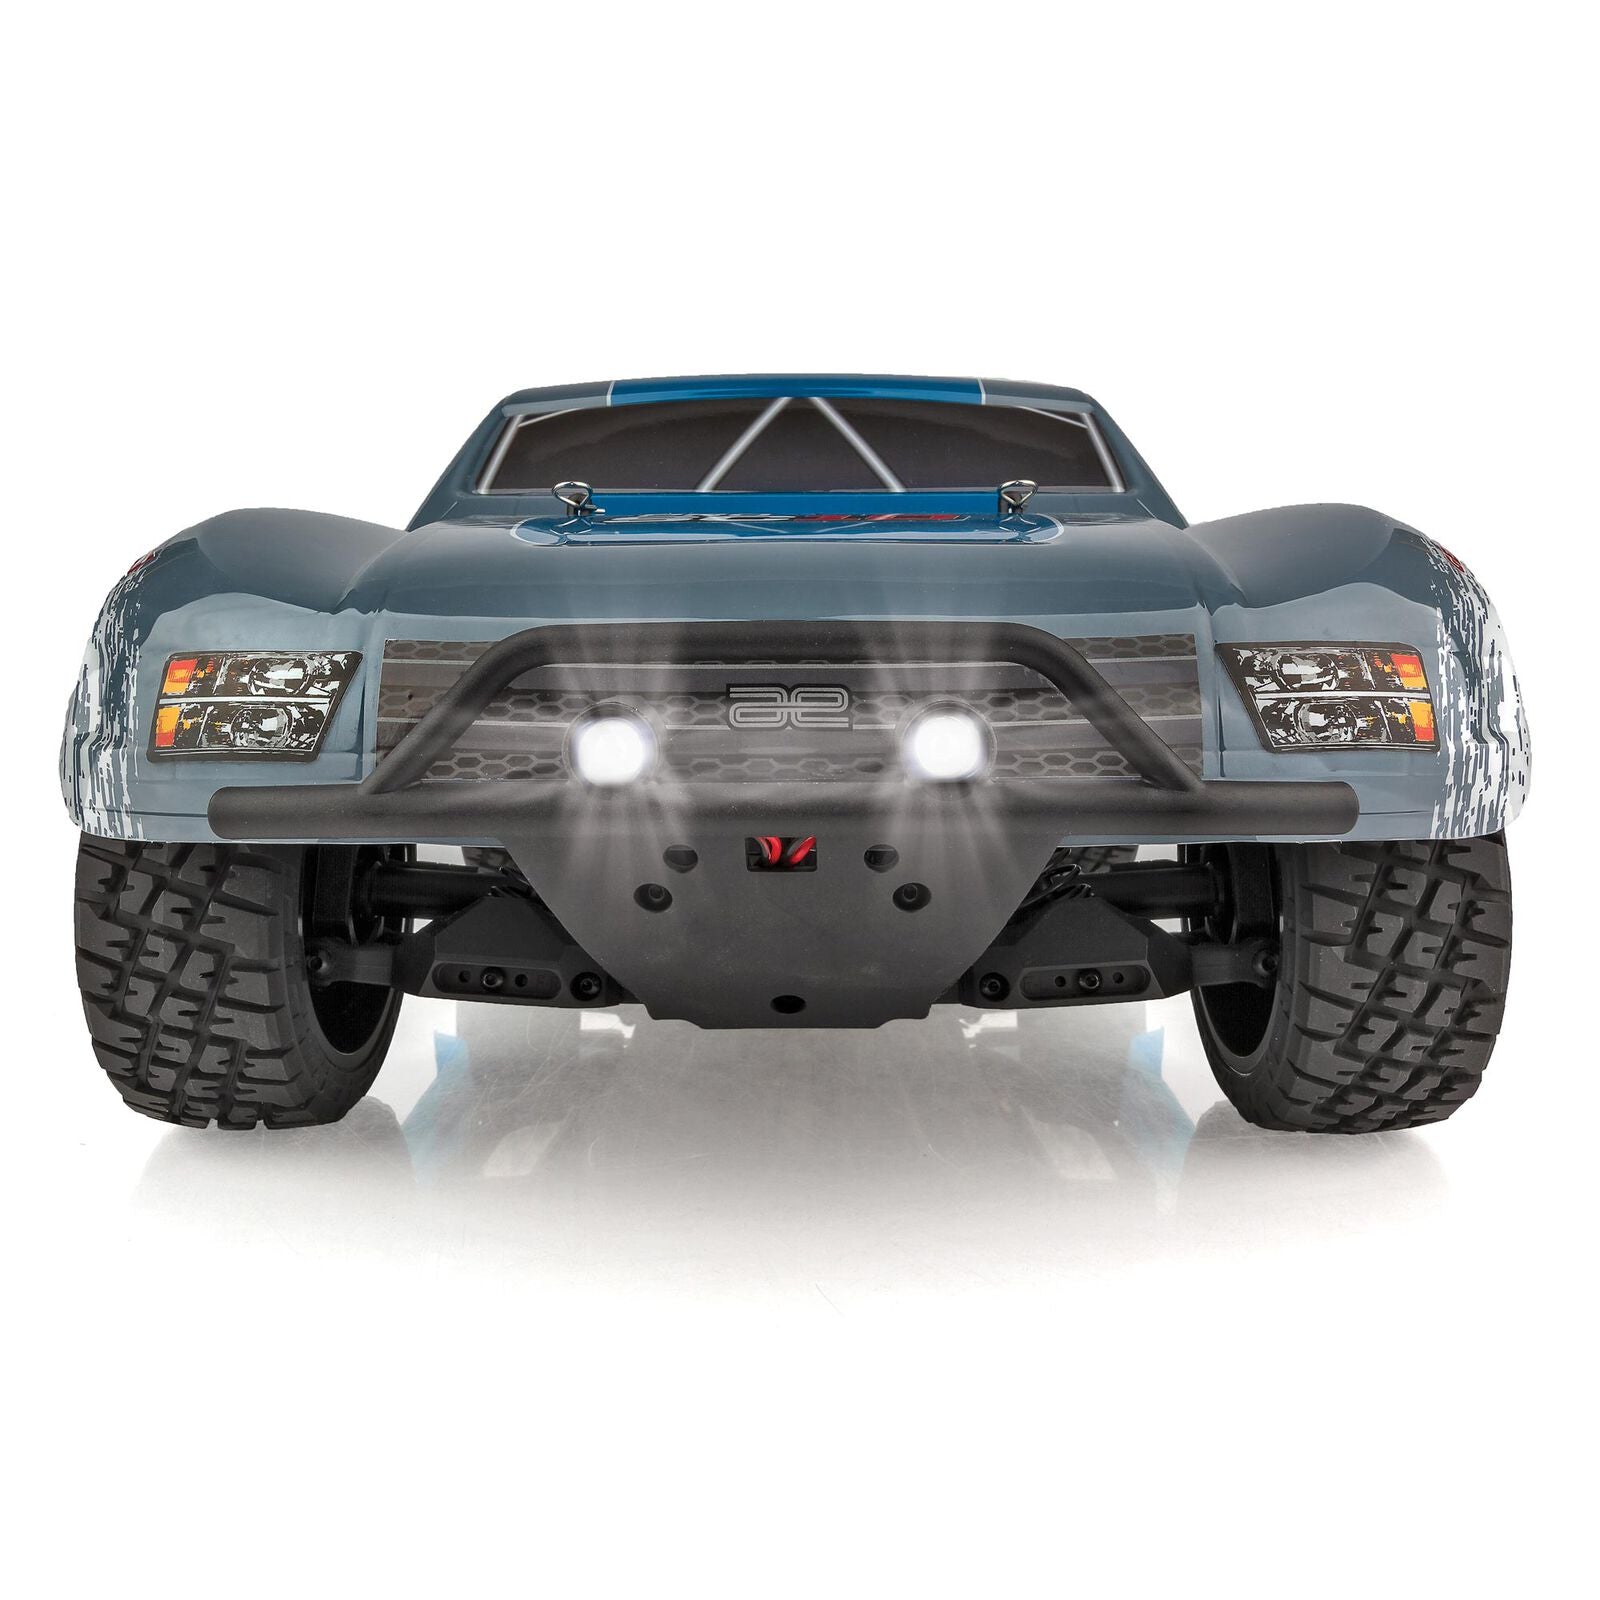 Team Associated Pro4 SC10 1/10 RTR 4WD Brushless Short Course Truck Combo w/2.4GHz Radio, 3S Battery & Charger 20530C3